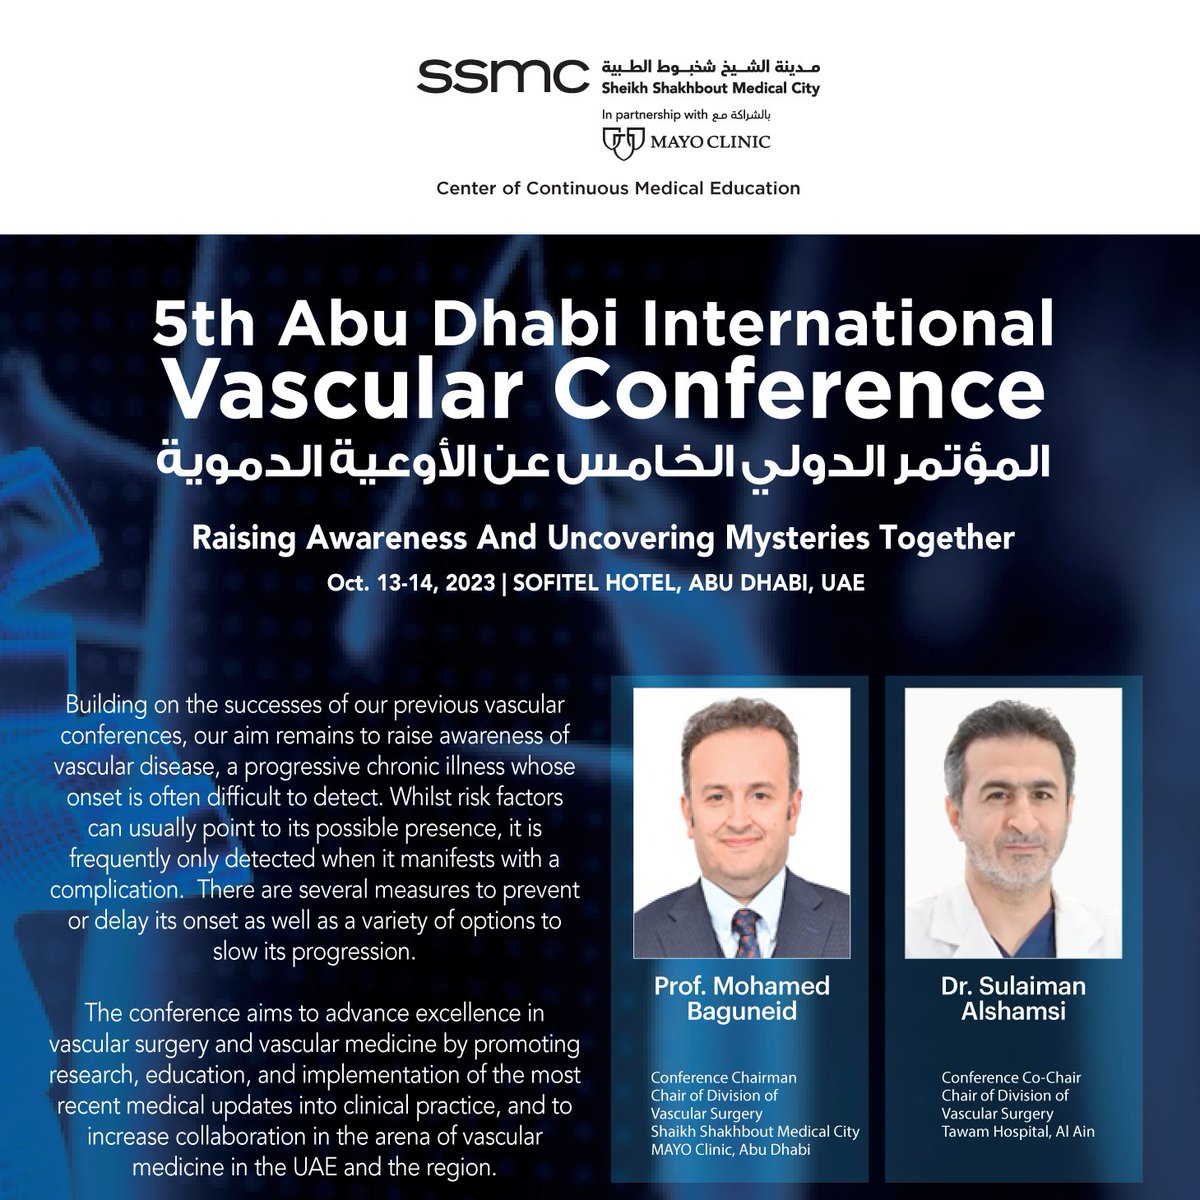 “5th Abu Dhabi International Vascular Conference” scheduled to be held on Oct. 13-14 2023, at Sofitel Hotel, Abu Dhabi, UAE.
#vascularconference #internationalconference #awareness #abudhabievents #abudhabiconference #menaconference #inabudhabi #simplyabudhabi #savethedate